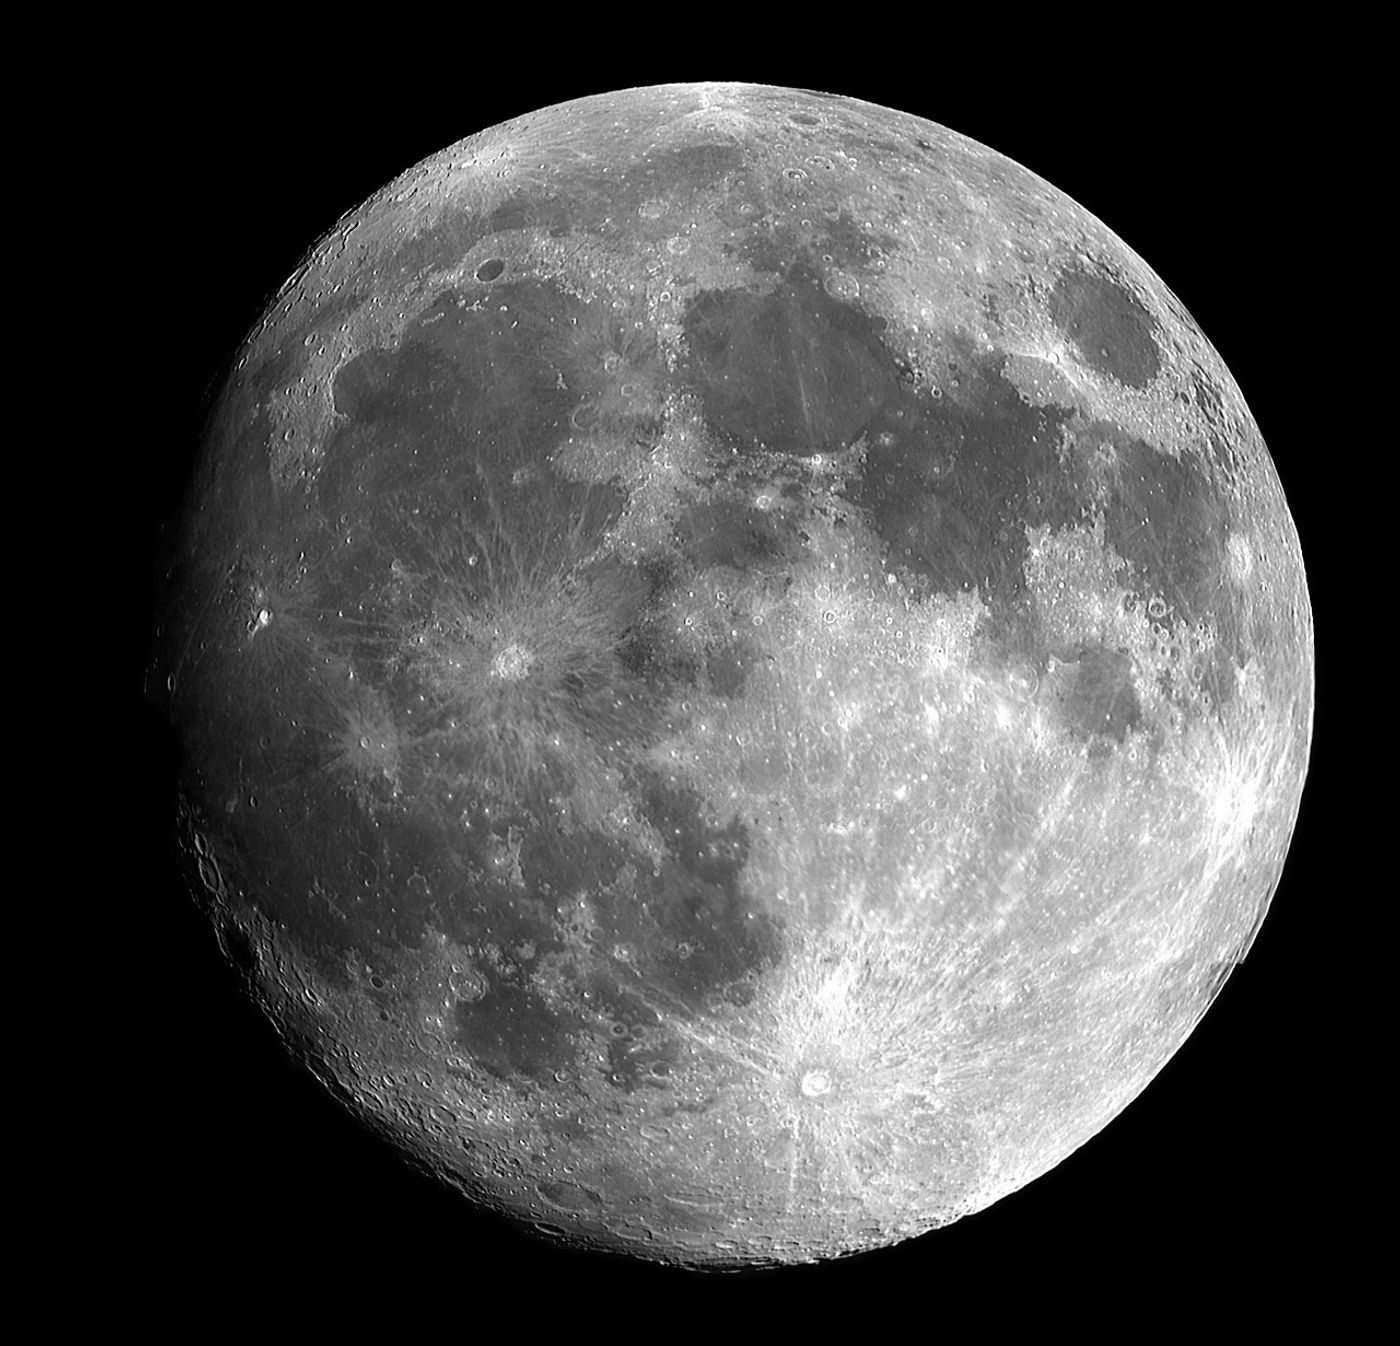 The moon is old, we know that, but just how old is it?